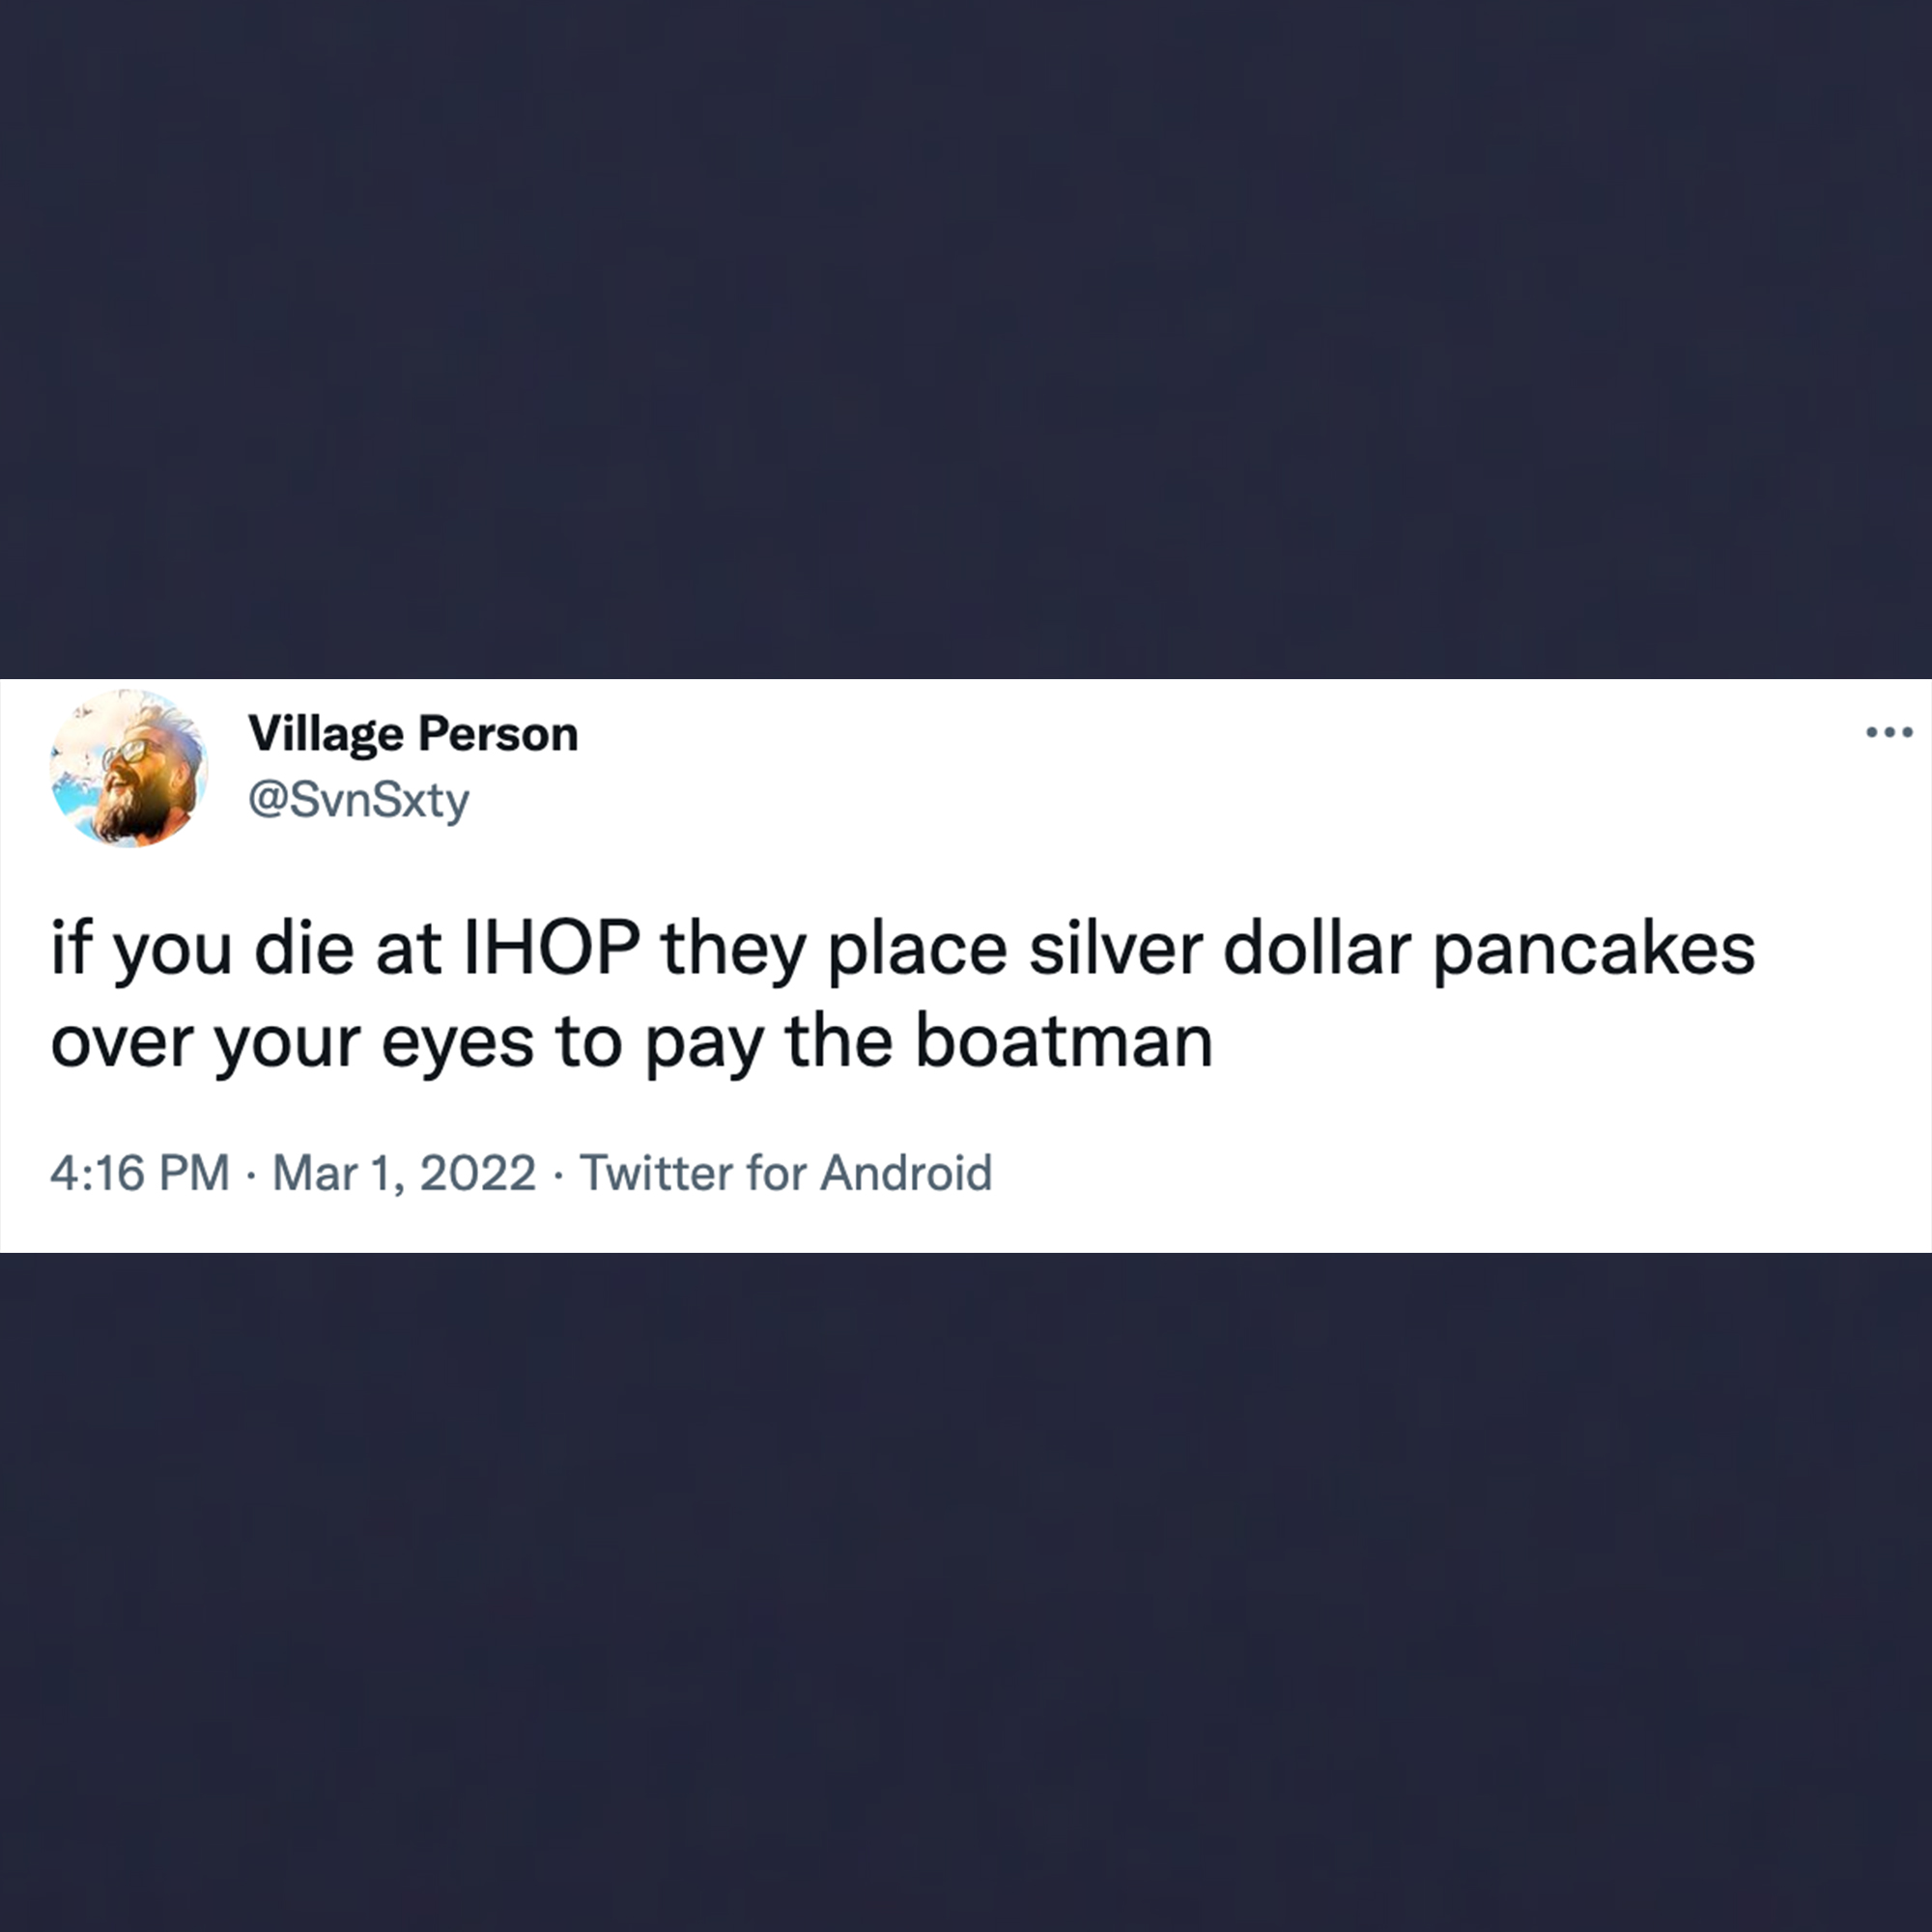 funny tweets - website - ... Village Person if you die at Ihop they place silver dollar pancakes over your eyes to pay the boatman . . Twitter for Android